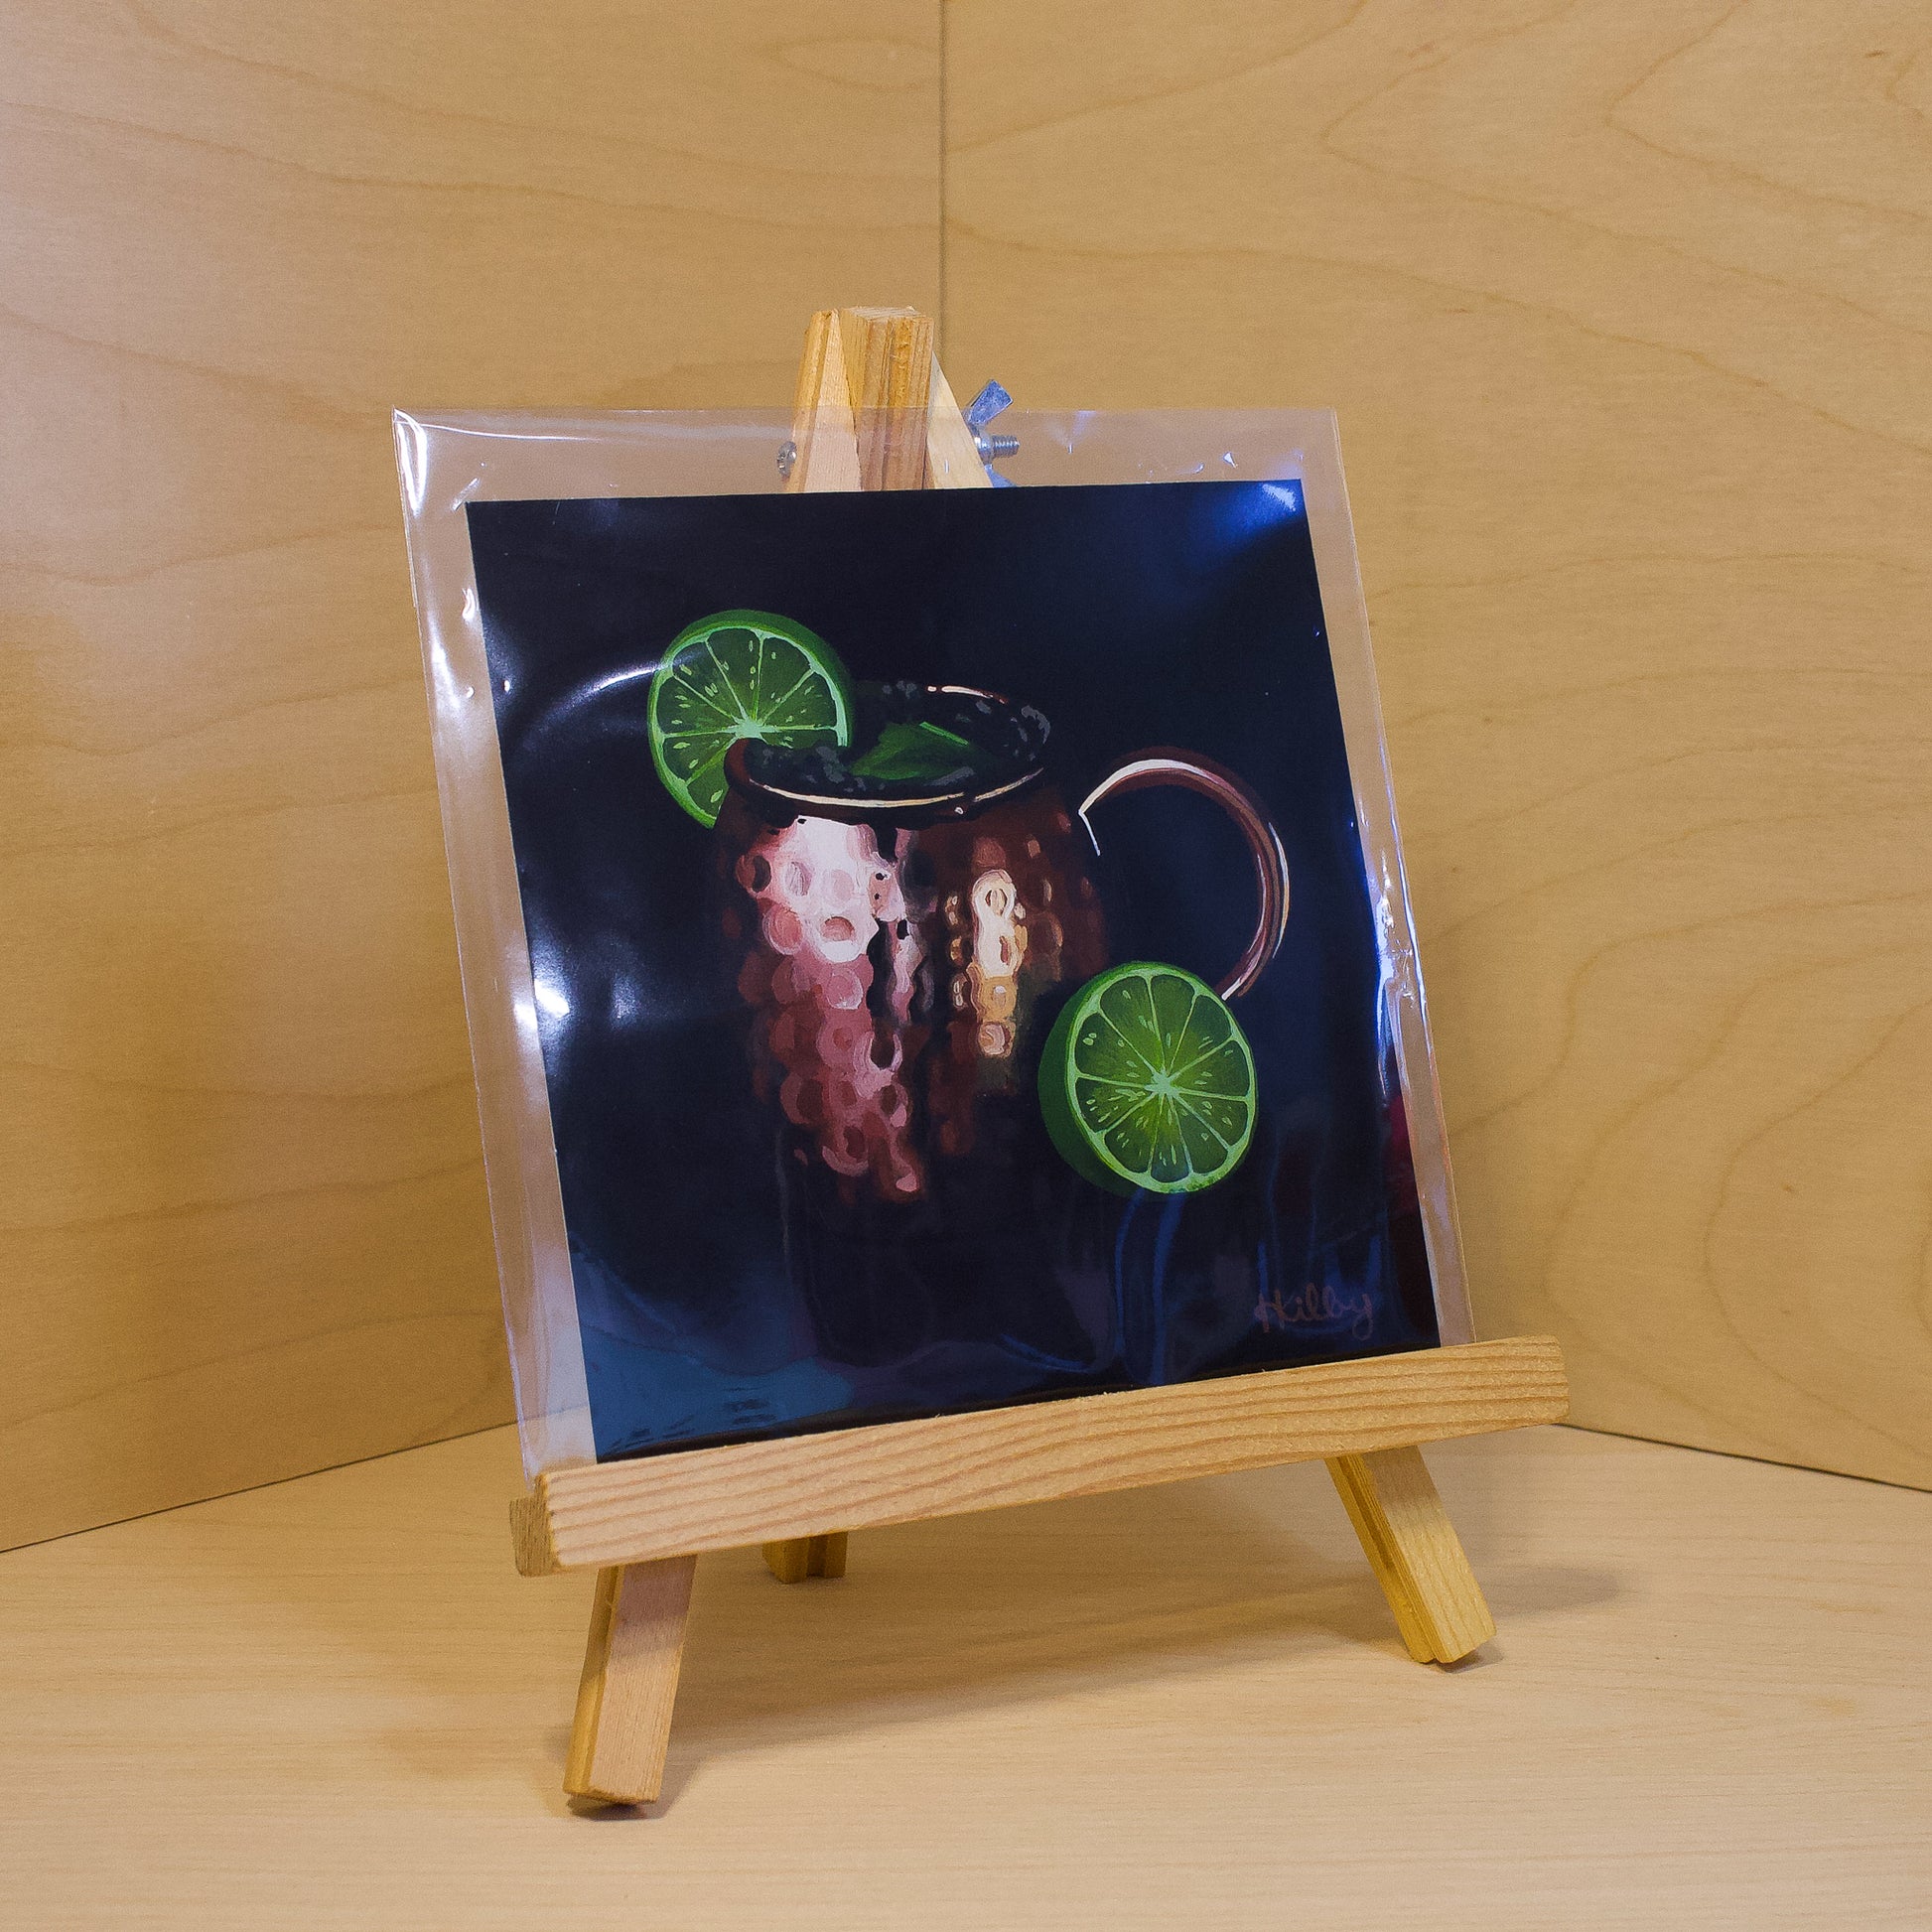 A 6x6" fine art print of the original acrylic painting "Moscow Mule" by Hannah Kilby from Hannah Michelle Studios. Displayed in a protective plastic sleeve on a small, wooden easel.